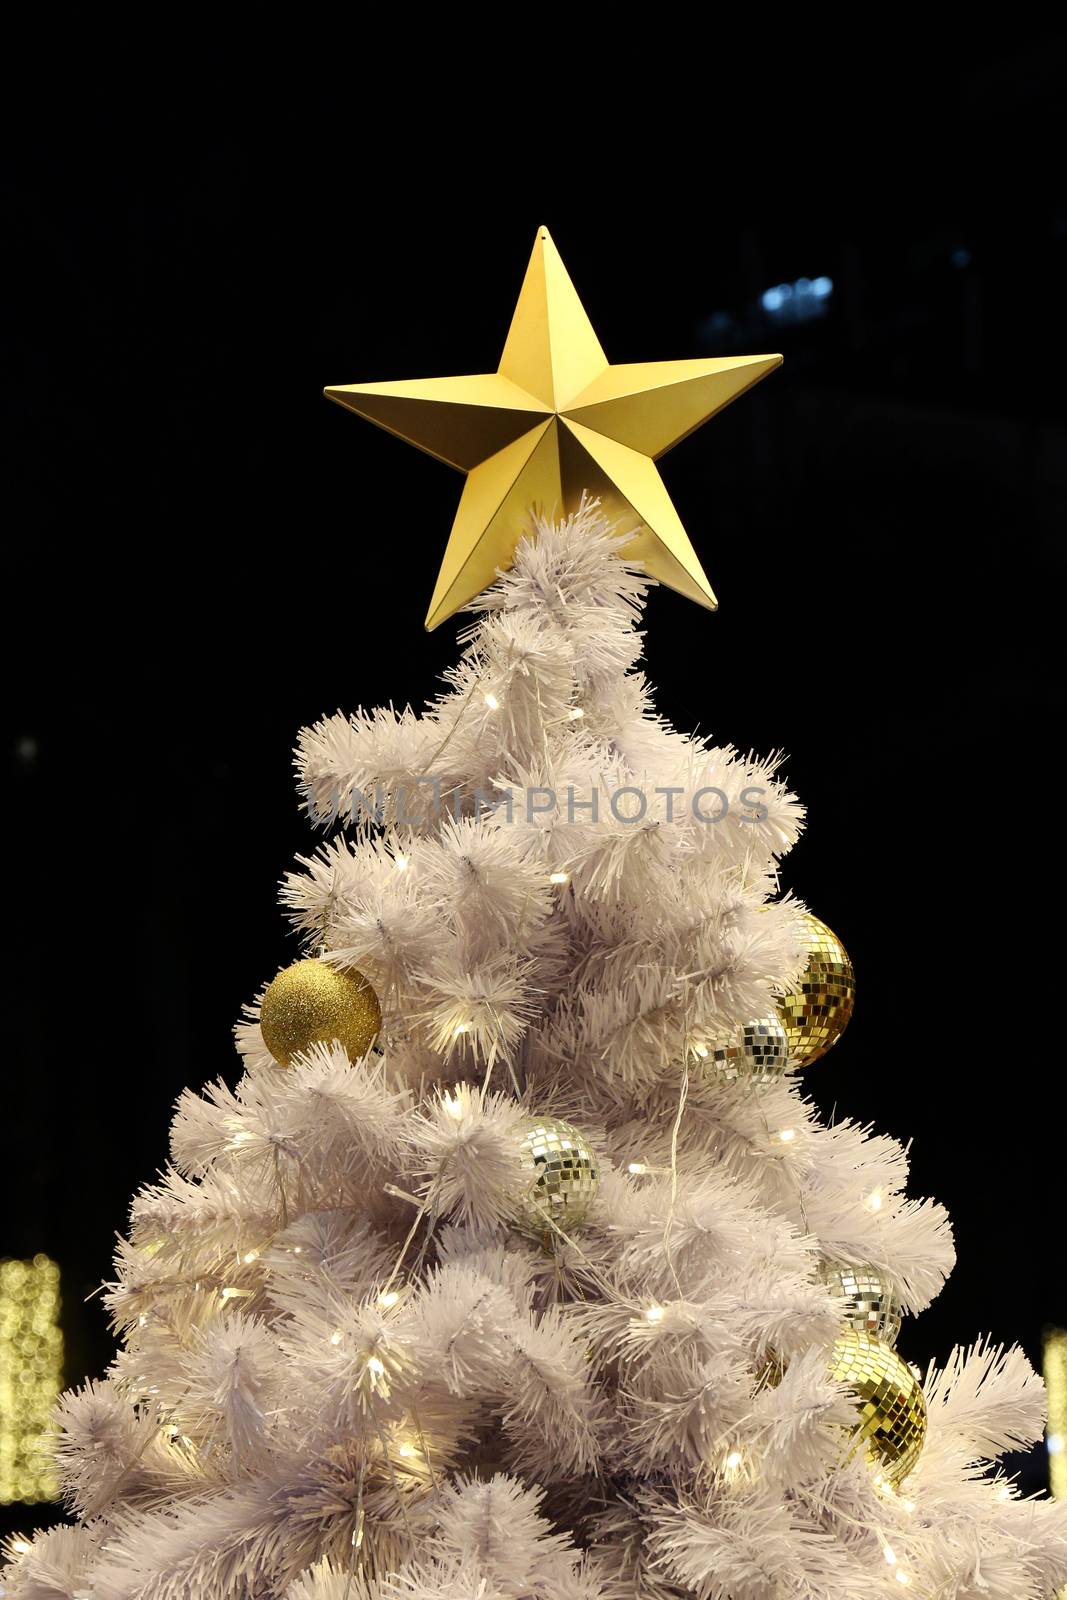 Golden Star and ball decoration on white Christmas tree background night (selective focus)